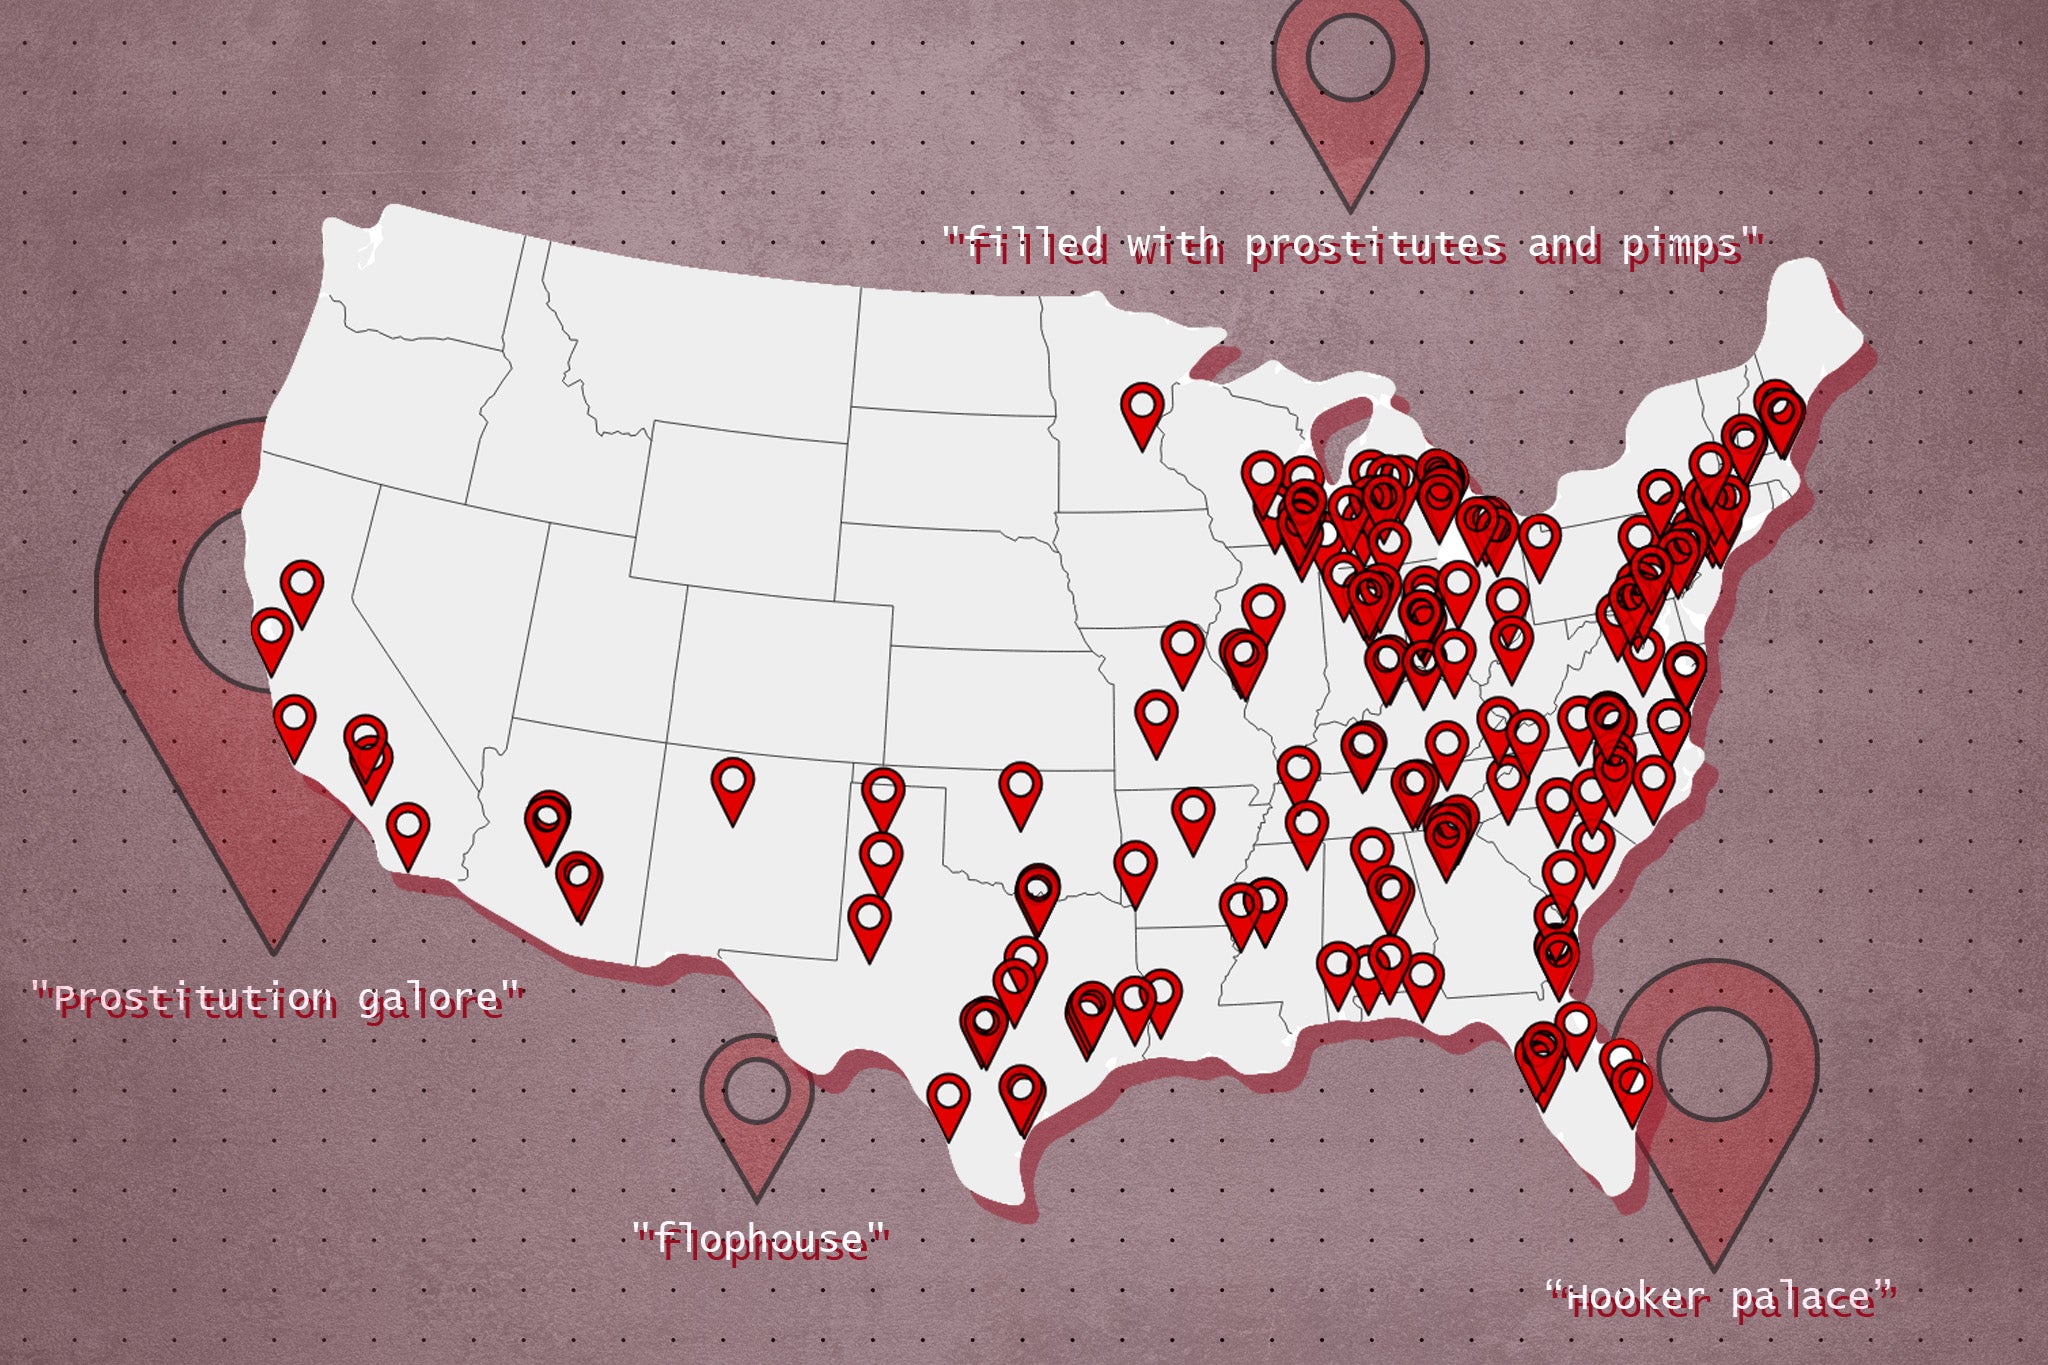 An interactive map compiled by The Independent shows where customers complained about prostitution at Red Roof Inn hotels.